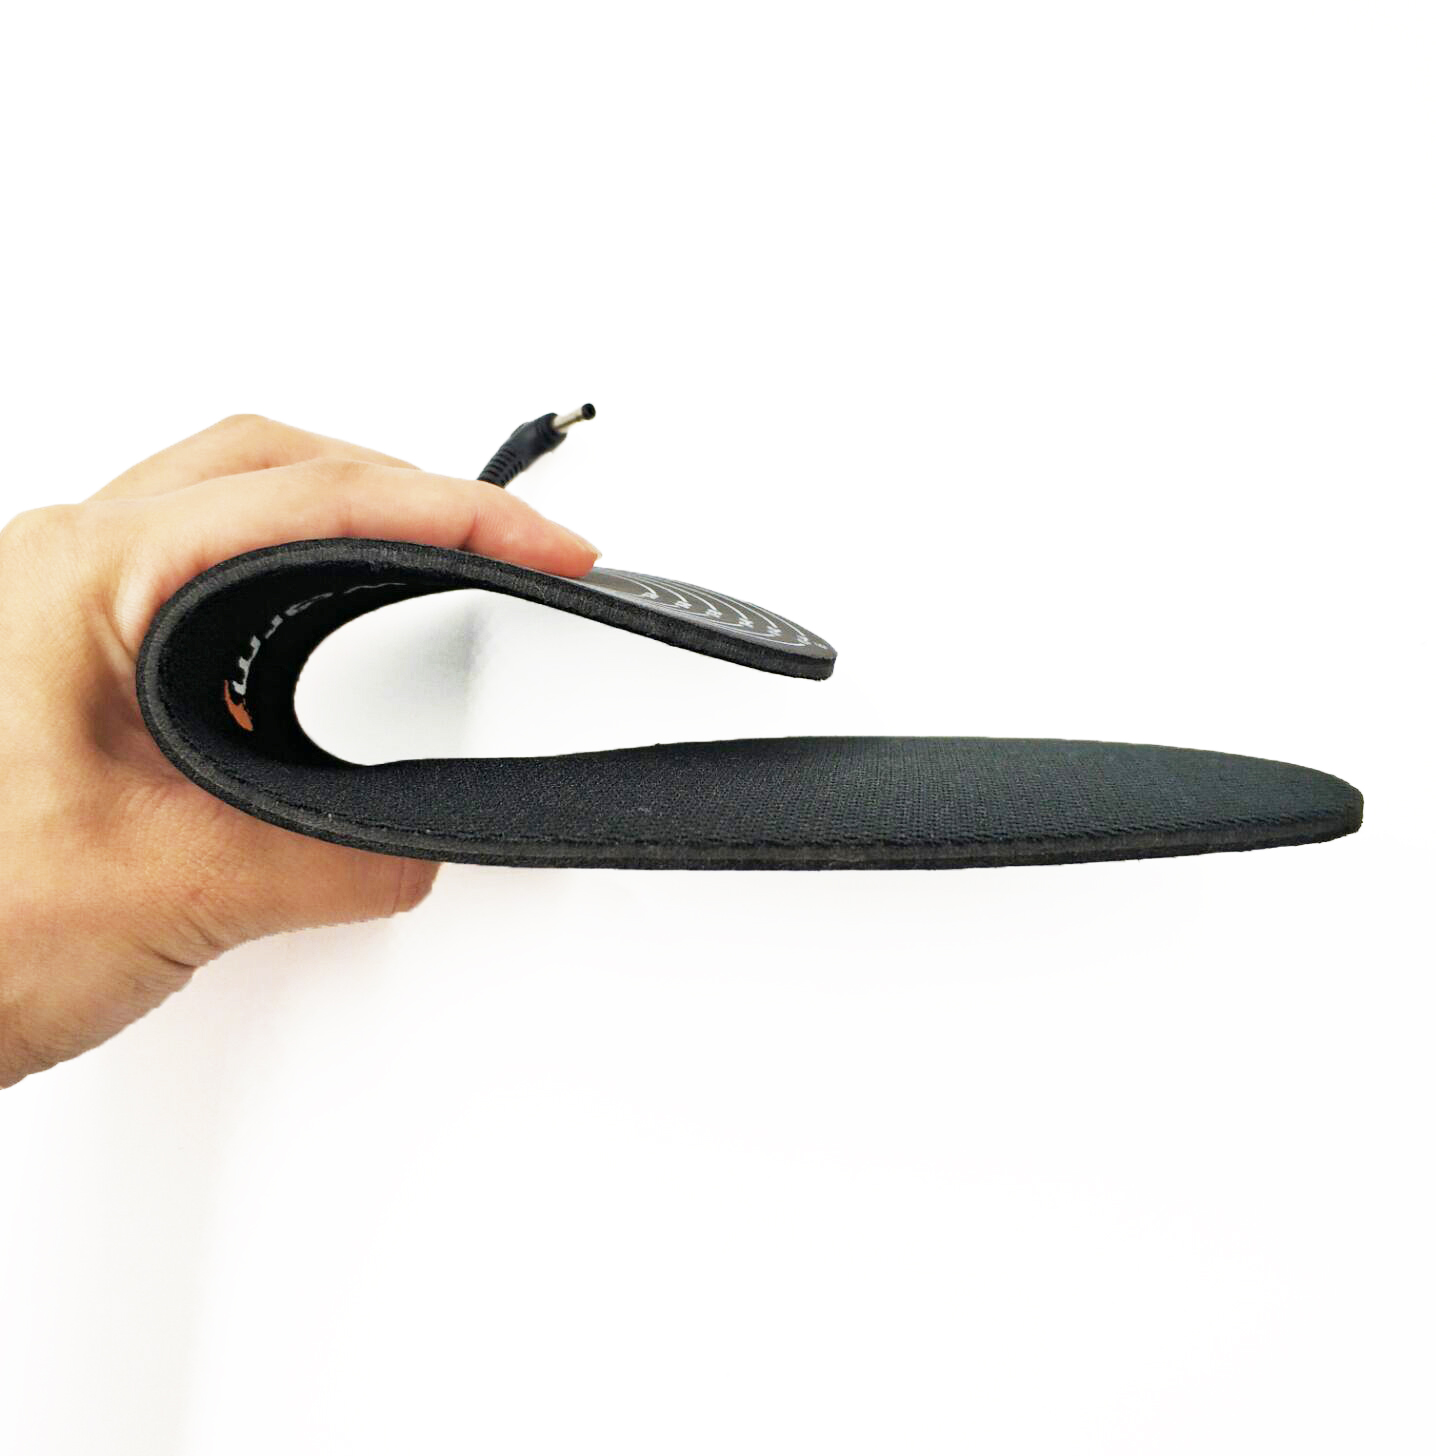 Dr. Warm winter battery operated insoles lasts for 3-7hours for home-13